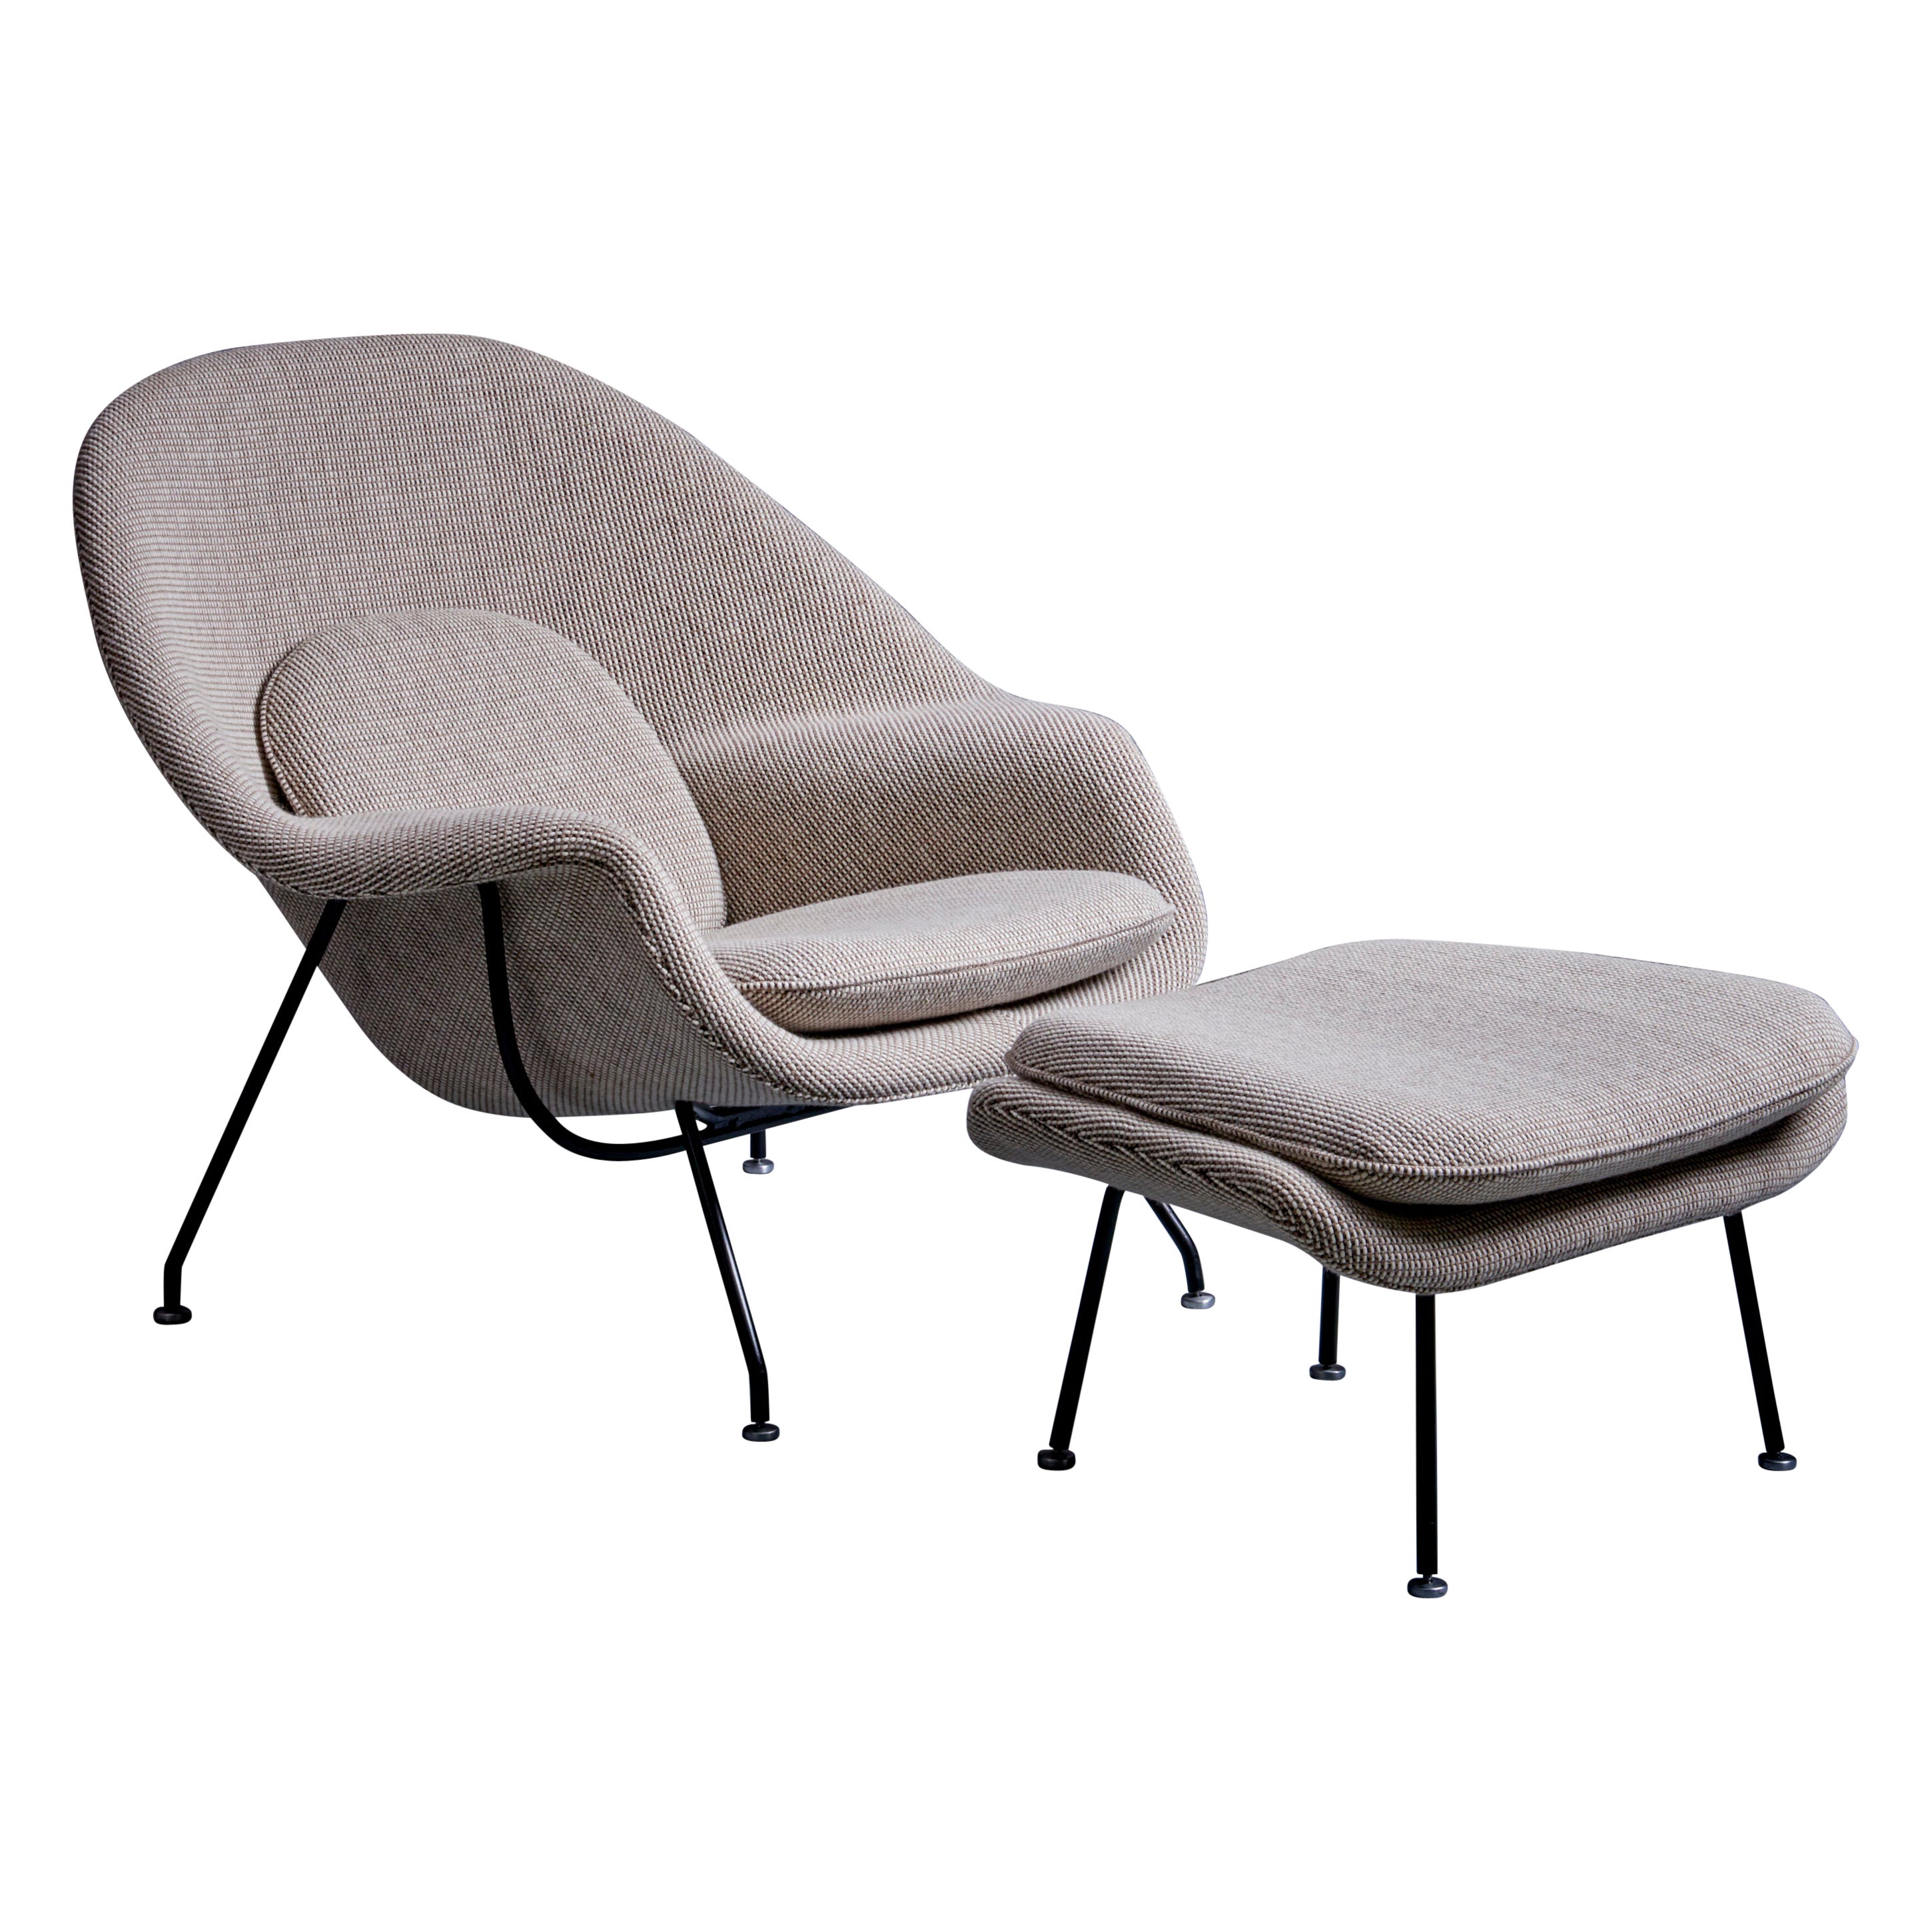 Newly upholstered Set of Eero Saarinen Womb Chair and Ottoman for Knoll, USA